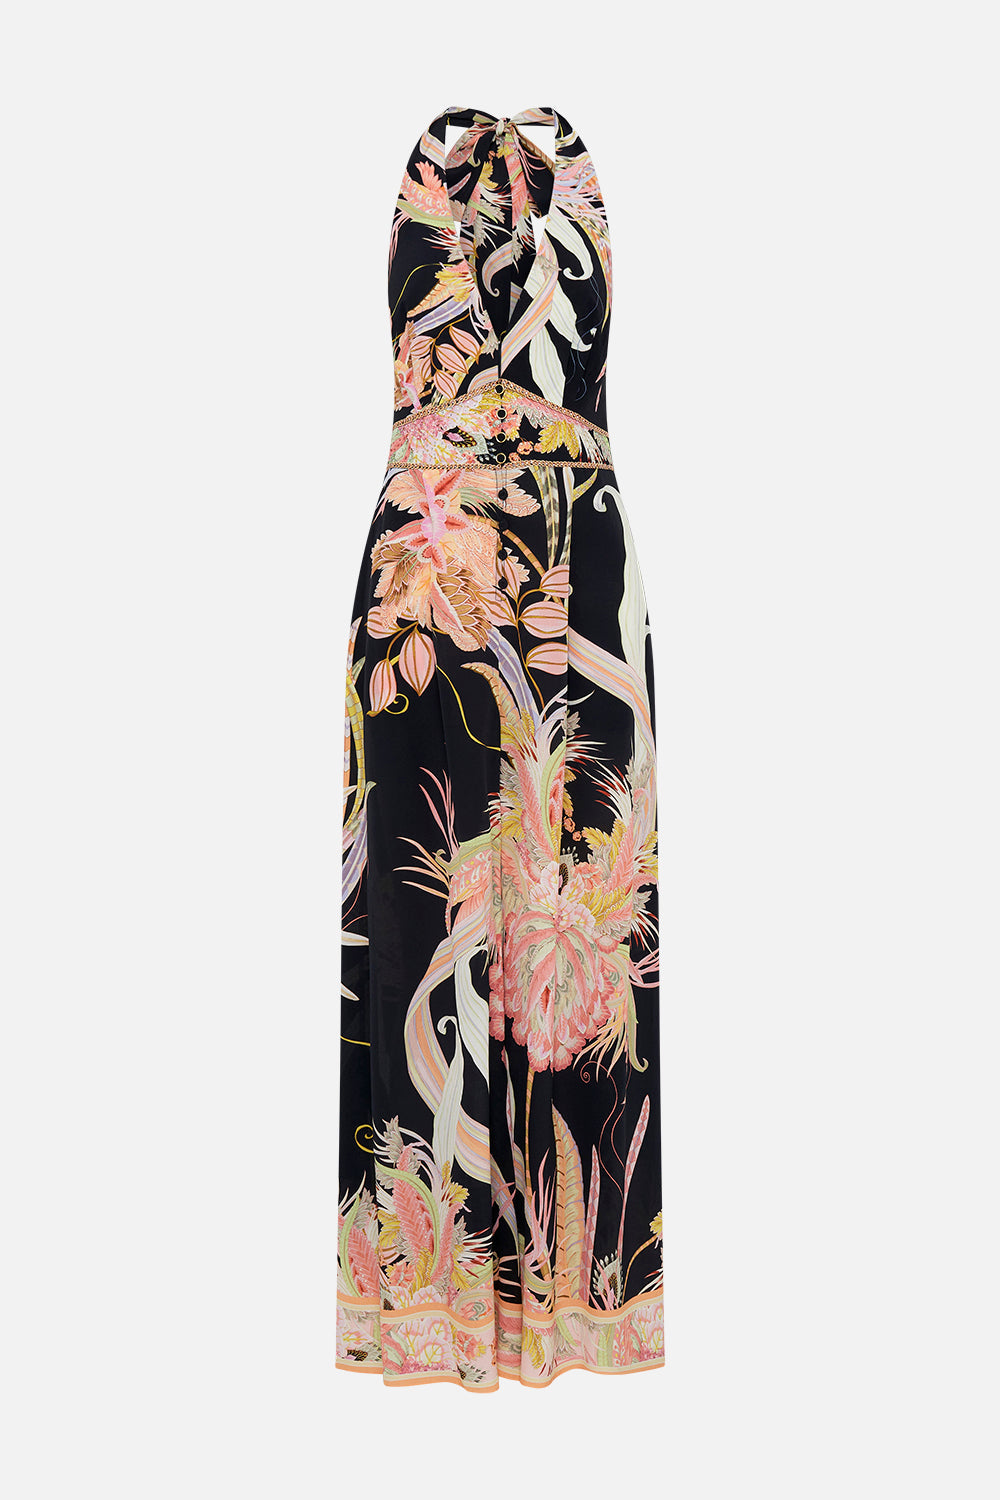 Product view of CAMILLA silk jumpsuit in Lady of The Moon print